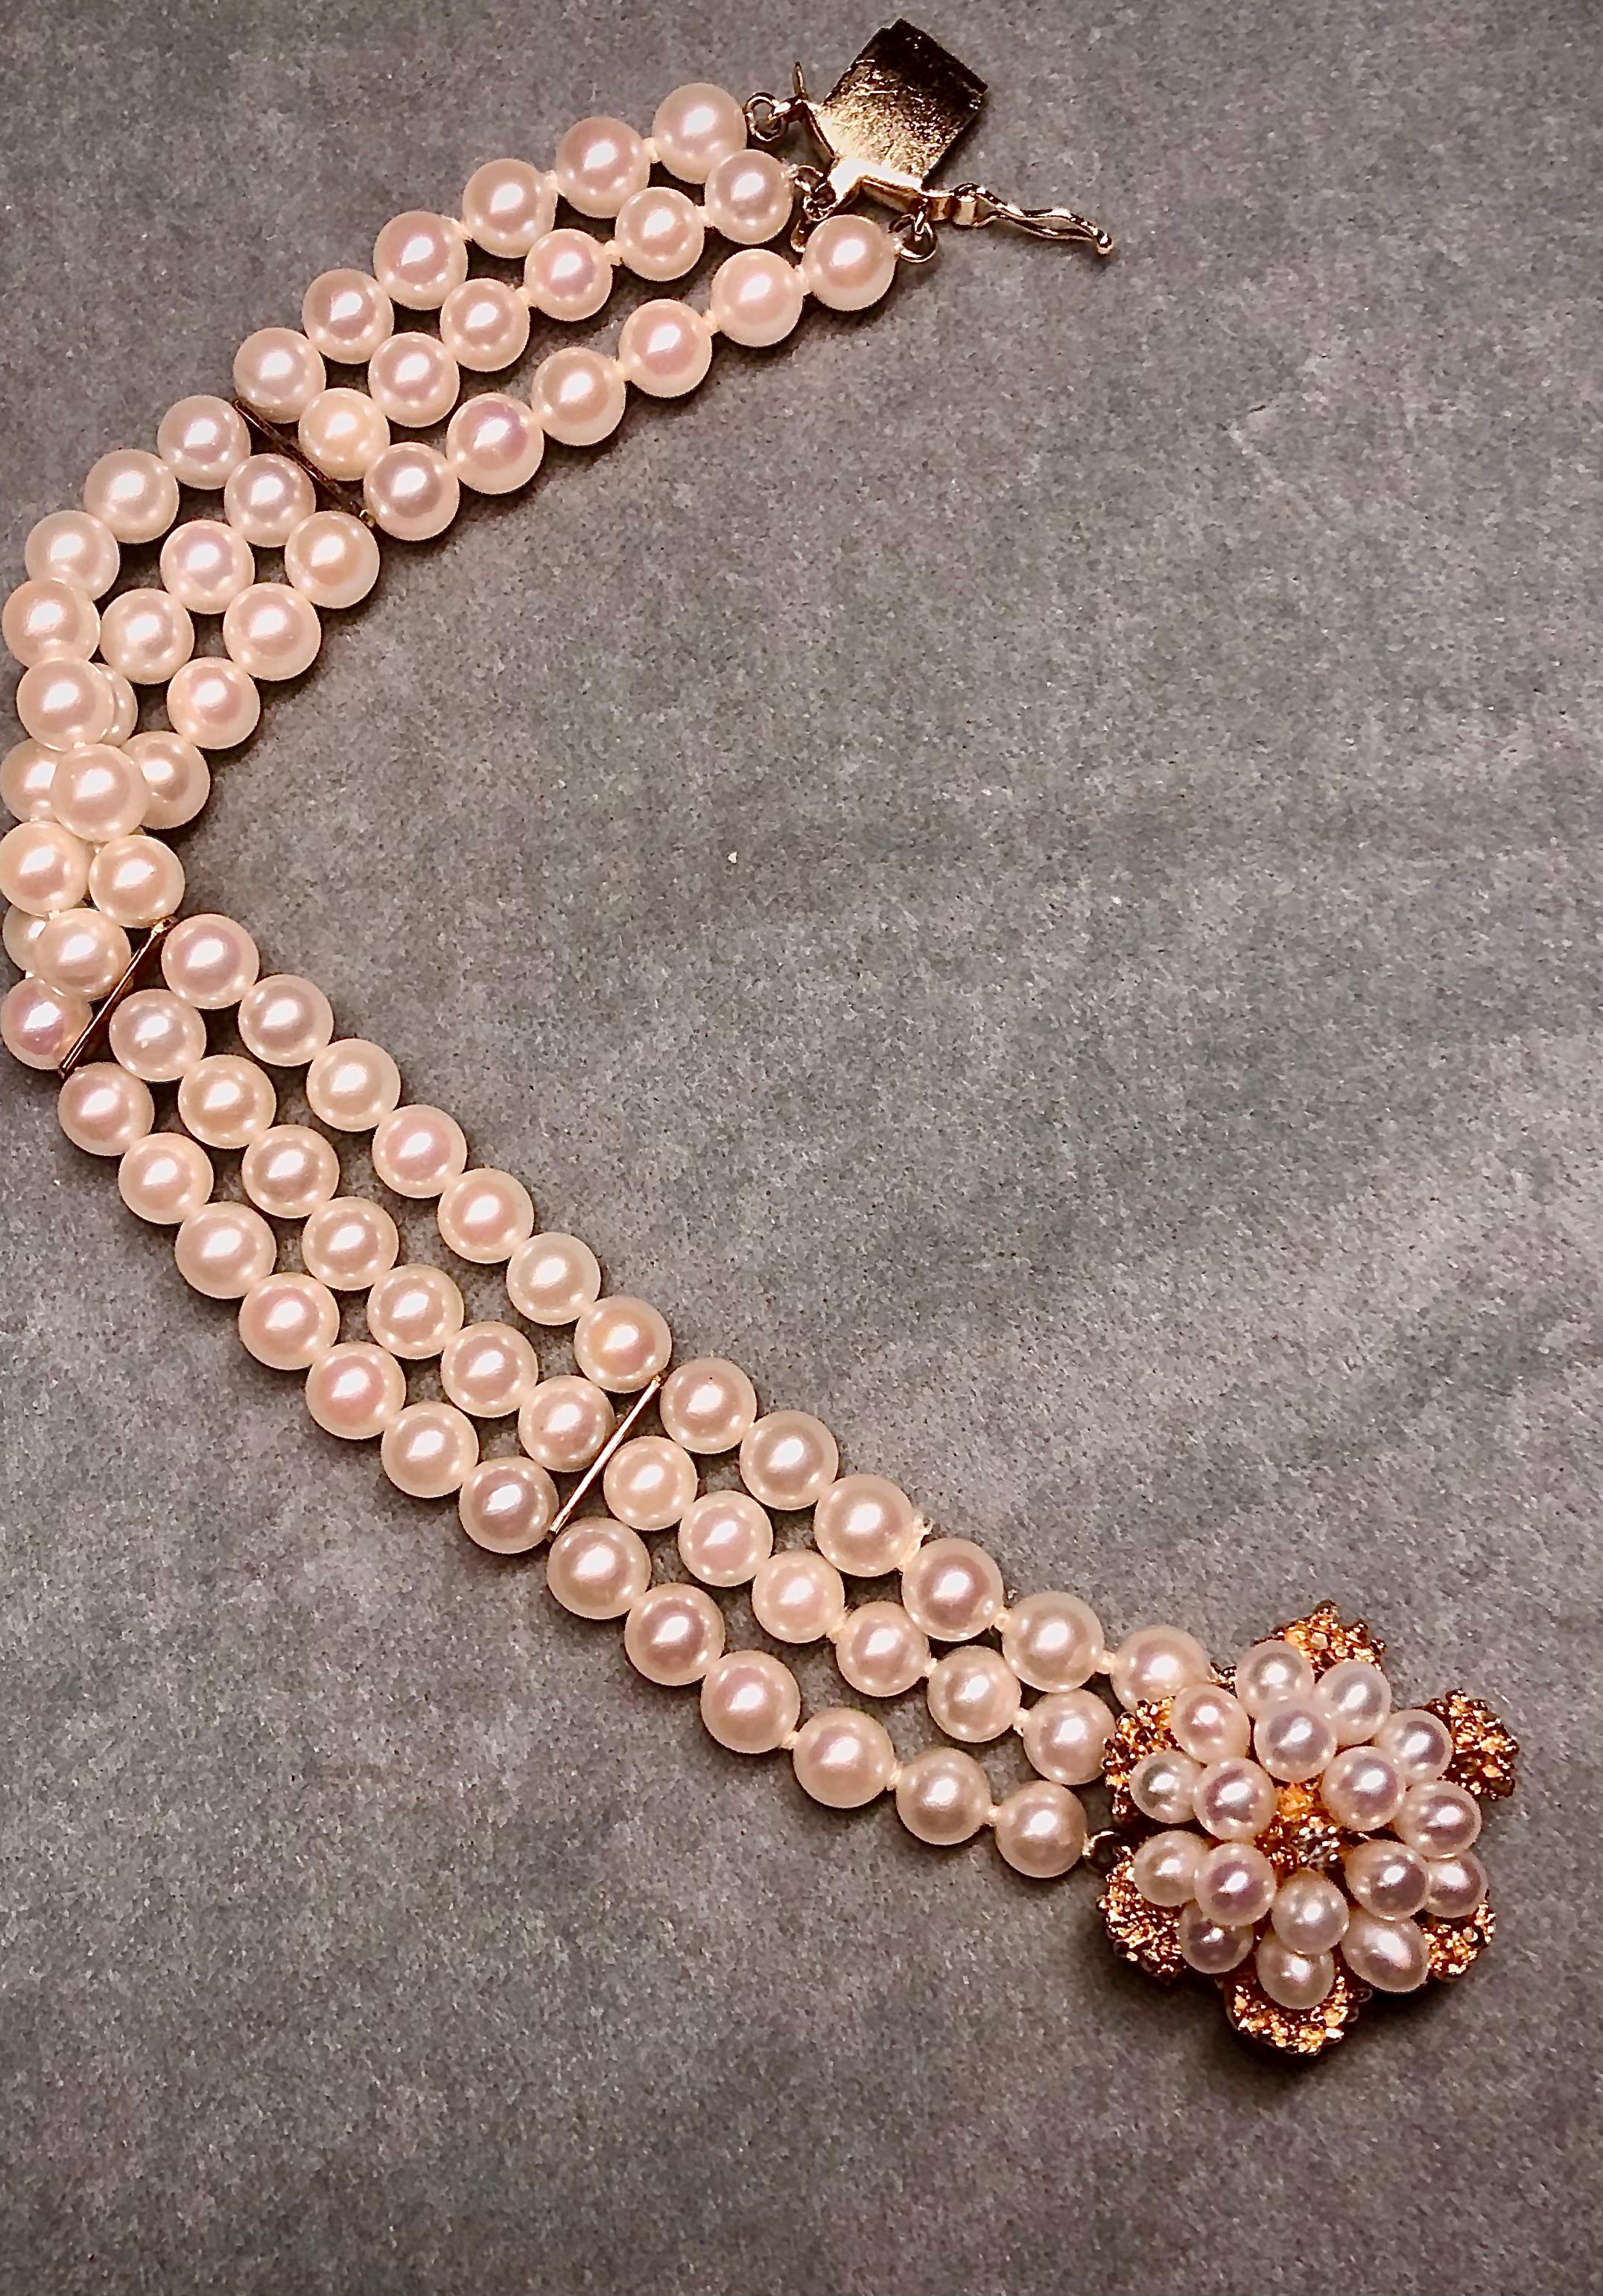 A very attractive three strand vintage bracelet with round high luster creamy white pearls. The bracelet is centered on an intricate 14kt gold floral motif clasp. The clasp is embellished with multiple pearls matching in color with the strands of